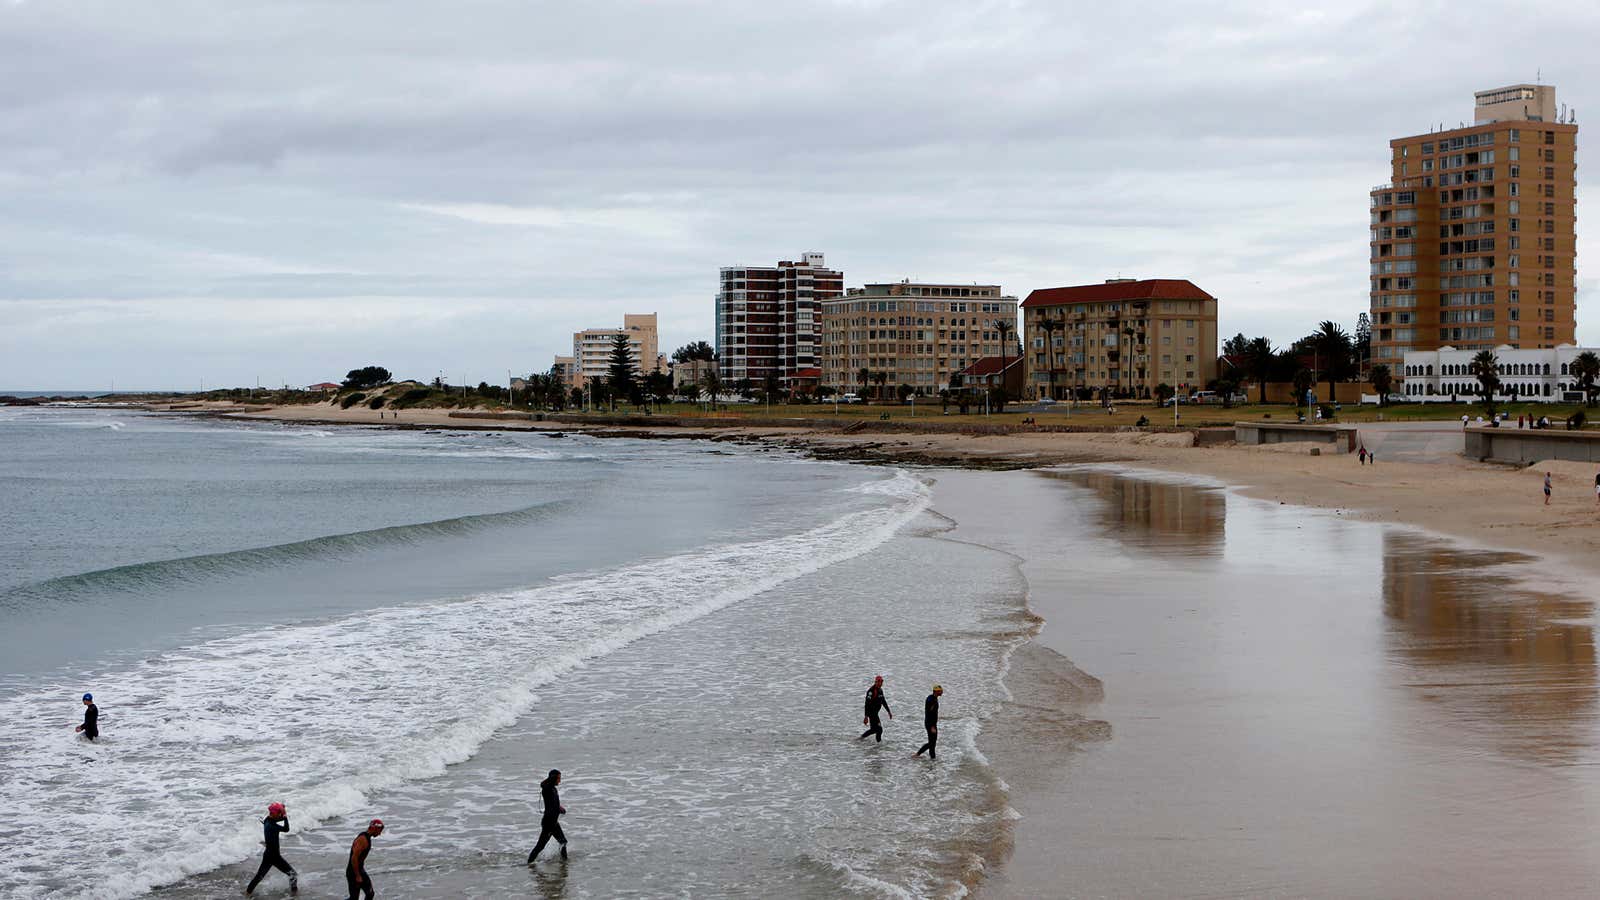 Visitors leave a beach after a swimming exercise in Port Elizabeth November 13, 2009. Port Elizabeth is one of nine South African cities hosting the…